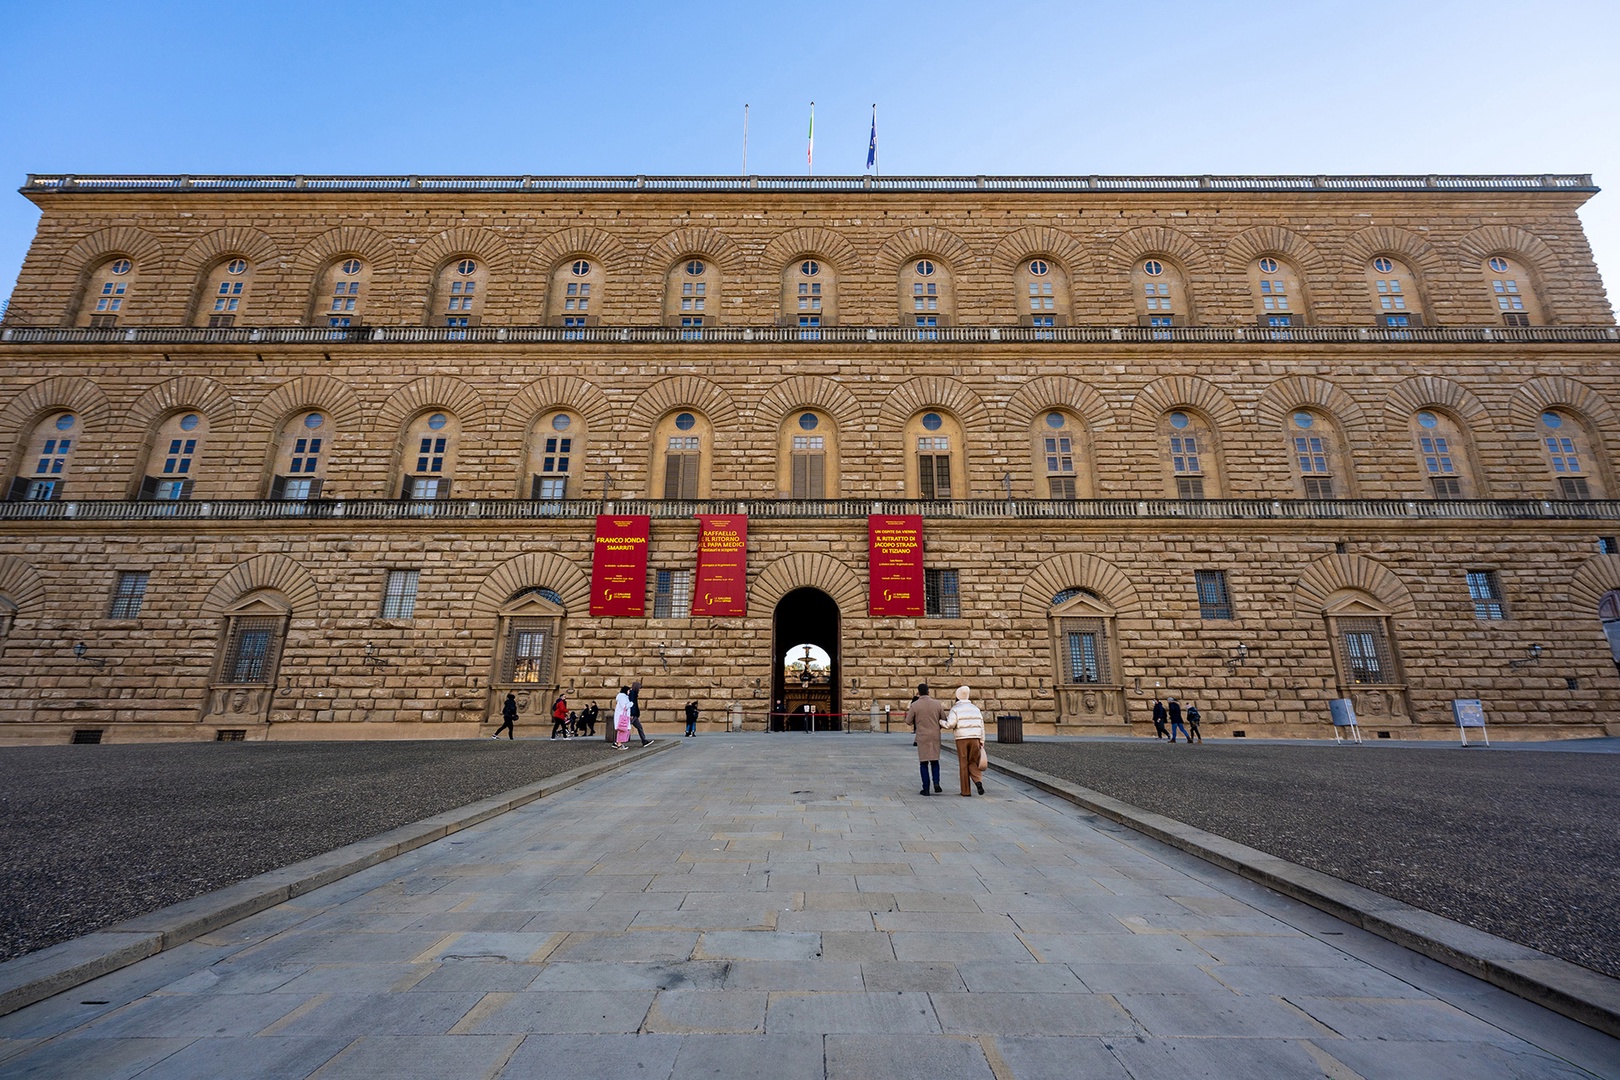 Monumental Piazza Pitti and the Boboli Gardens are steps away.